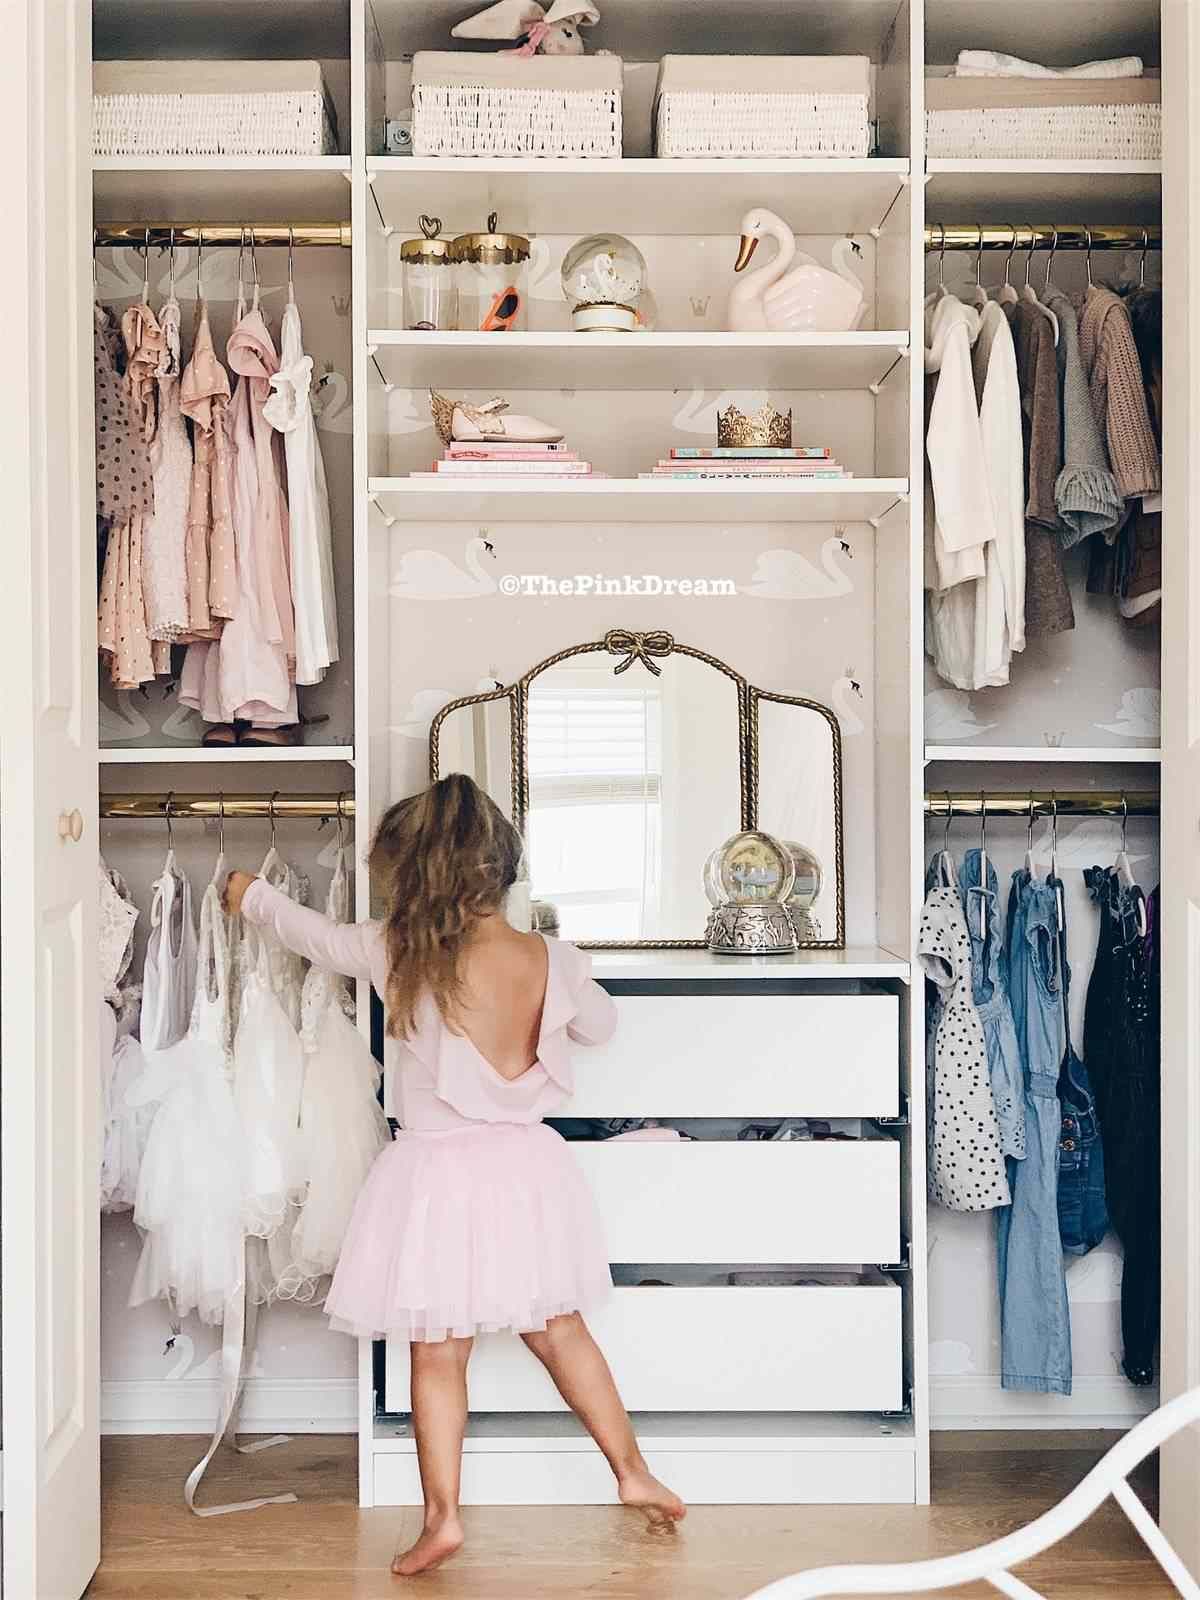 8 Tips For Designing Better Kids' Rooms Pertaining To Double Rail Childrens Wardrobes (View 11 of 15)